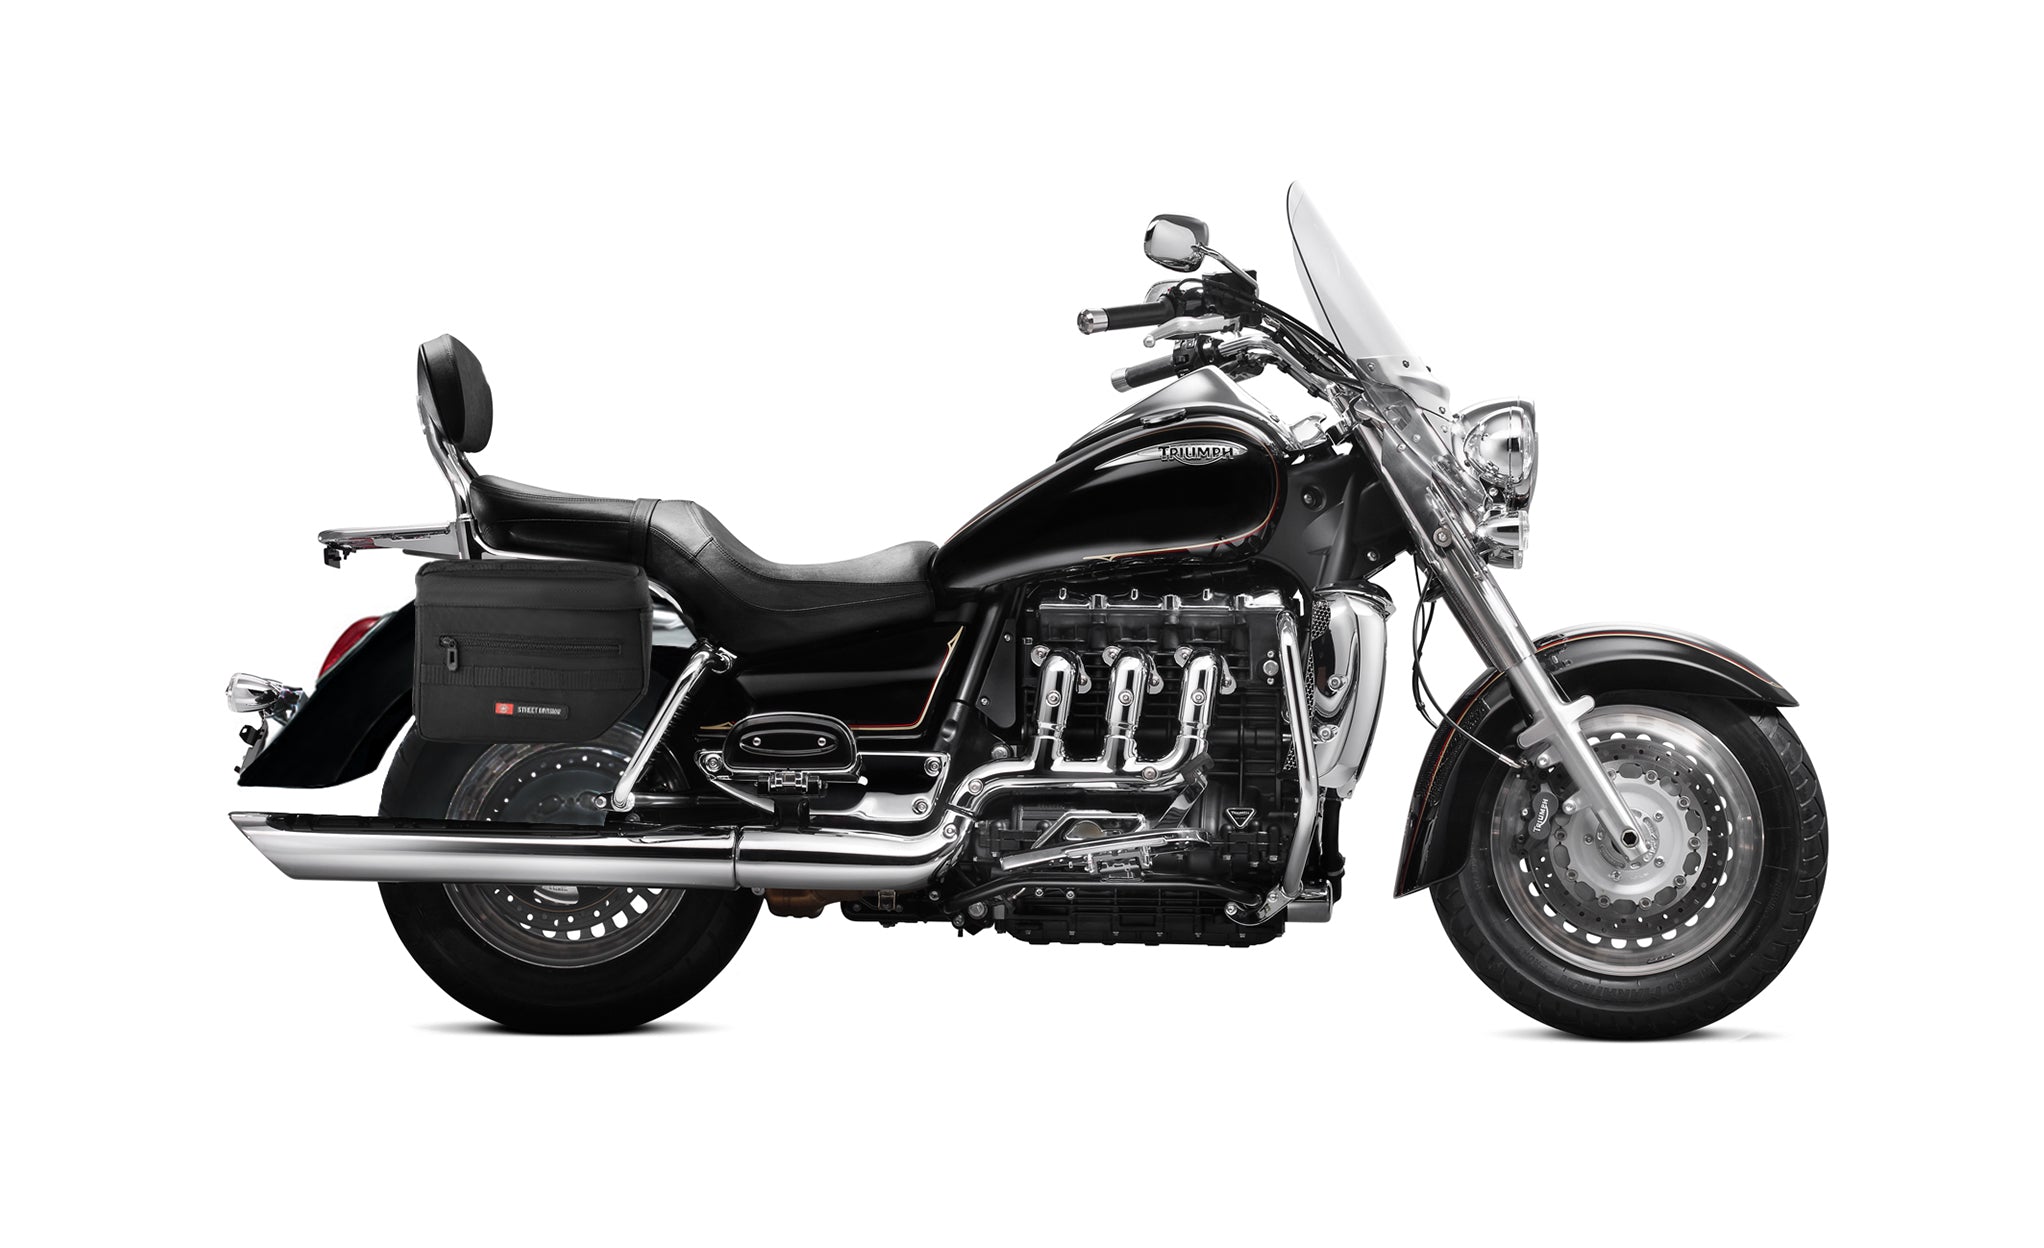 Viking Patriot Small Triumph Rocket Iii Touring Motorcycle Throw Over Saddlebags on Bike Photo @expand